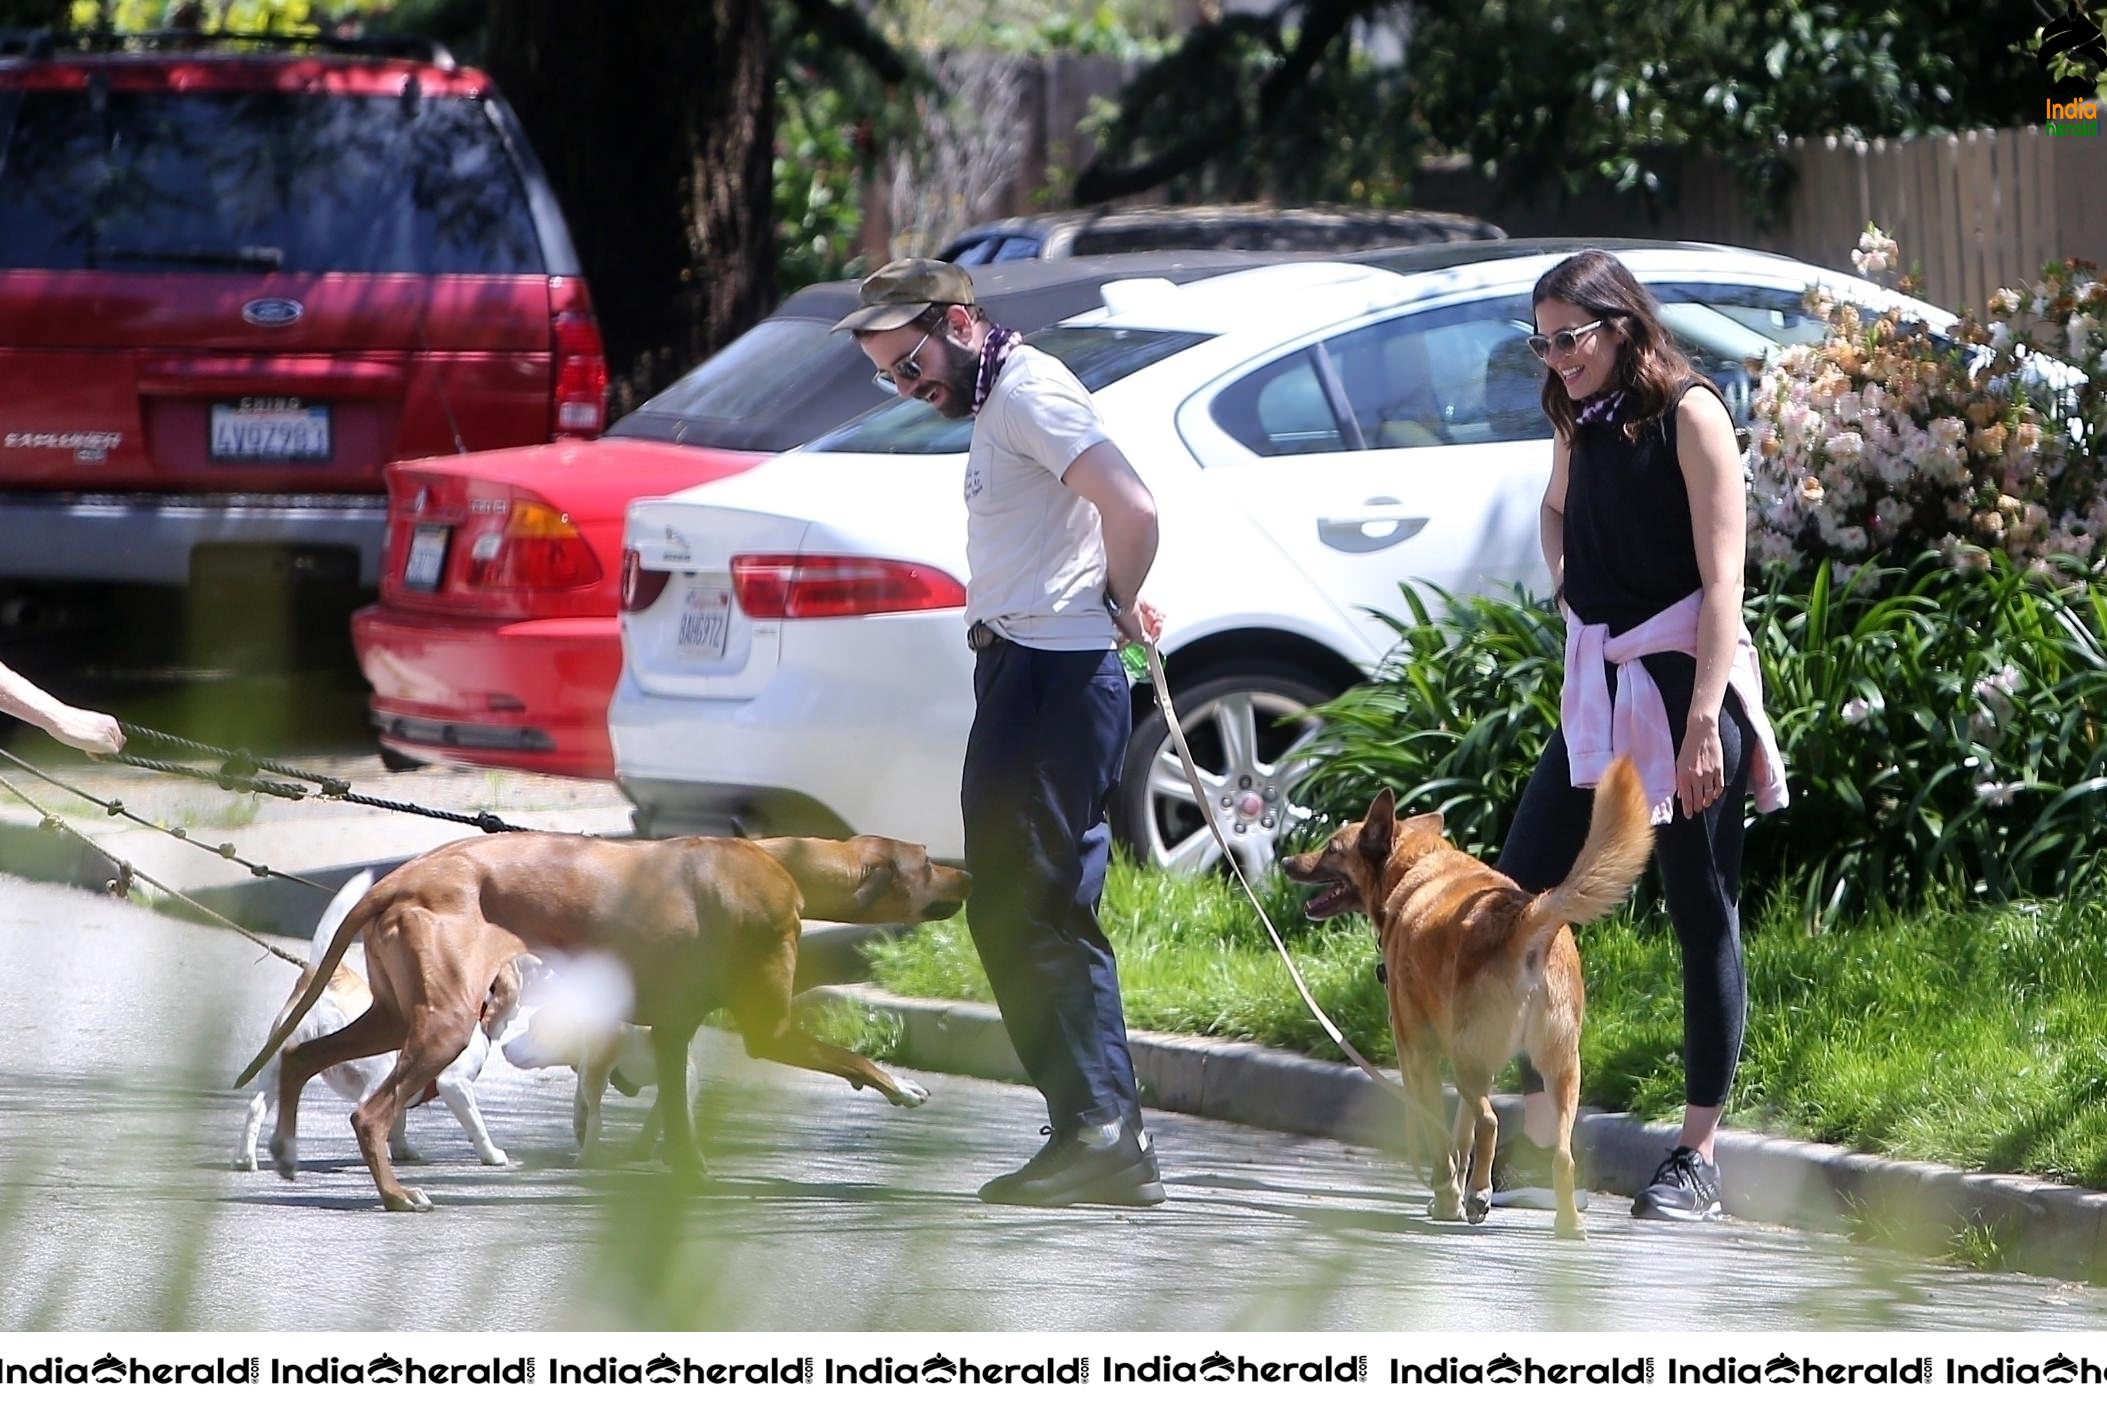 Mandy Moore caught by Paparazzi while walking her dog in Los Angeles